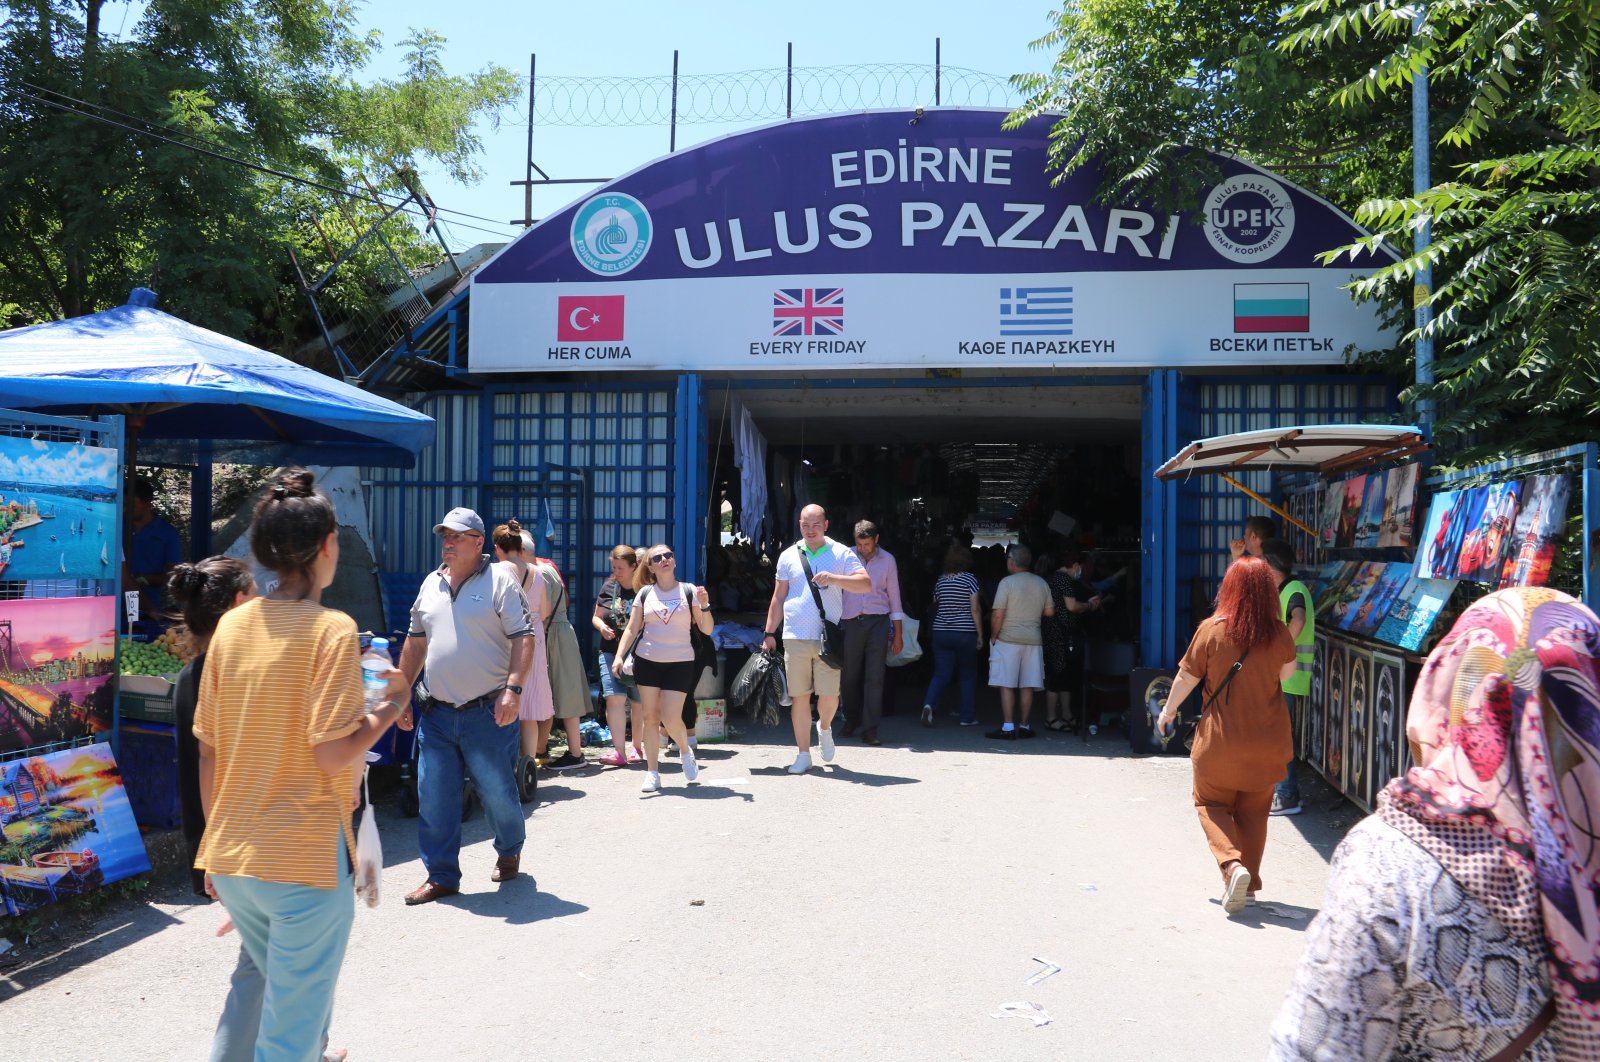 People are seen entering and exiting Ulus Pazarı, a famous local marketplace in the northwestern province of Edirne, Turkey, June 17, 2022. (IHA Photo)